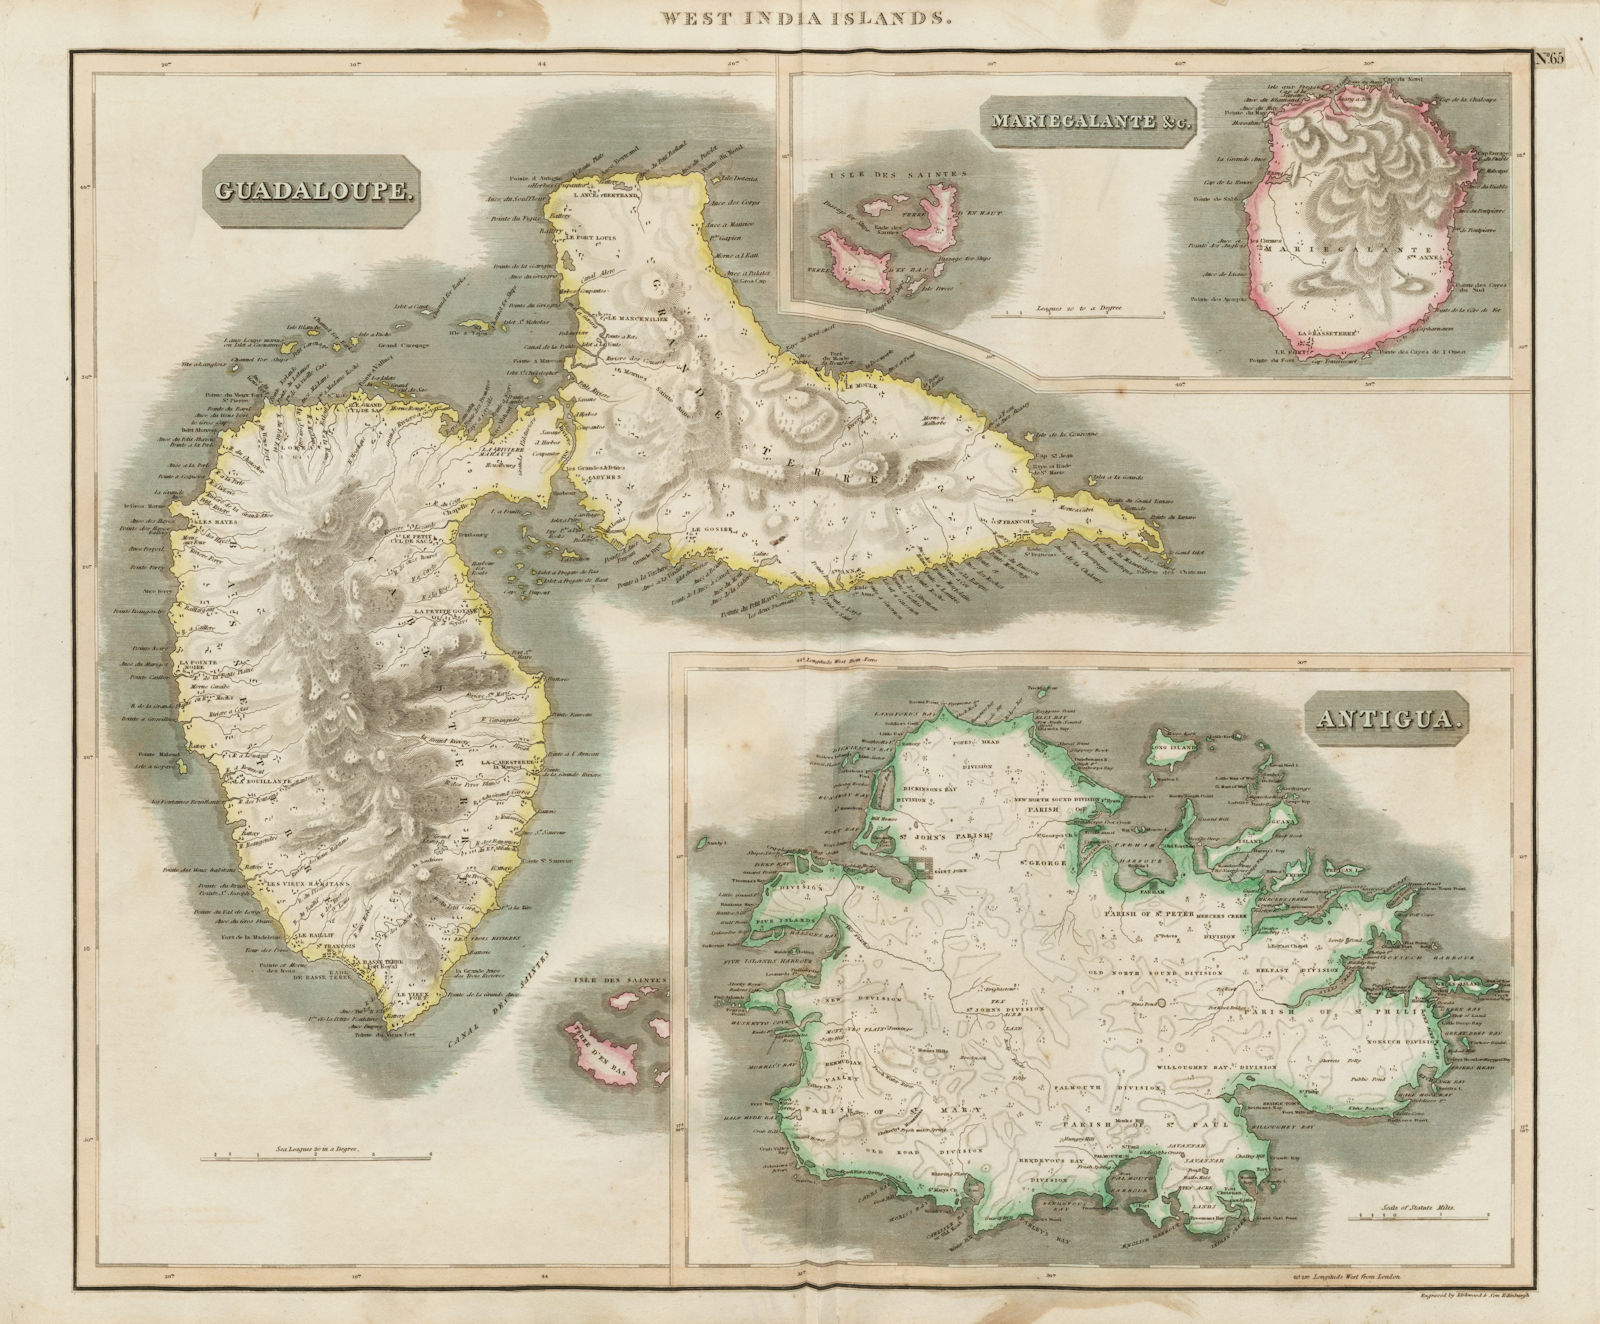 Antigua, Guadeloupe & Marie-Galante. West Indies Caribbean. THOMSON 1817 map